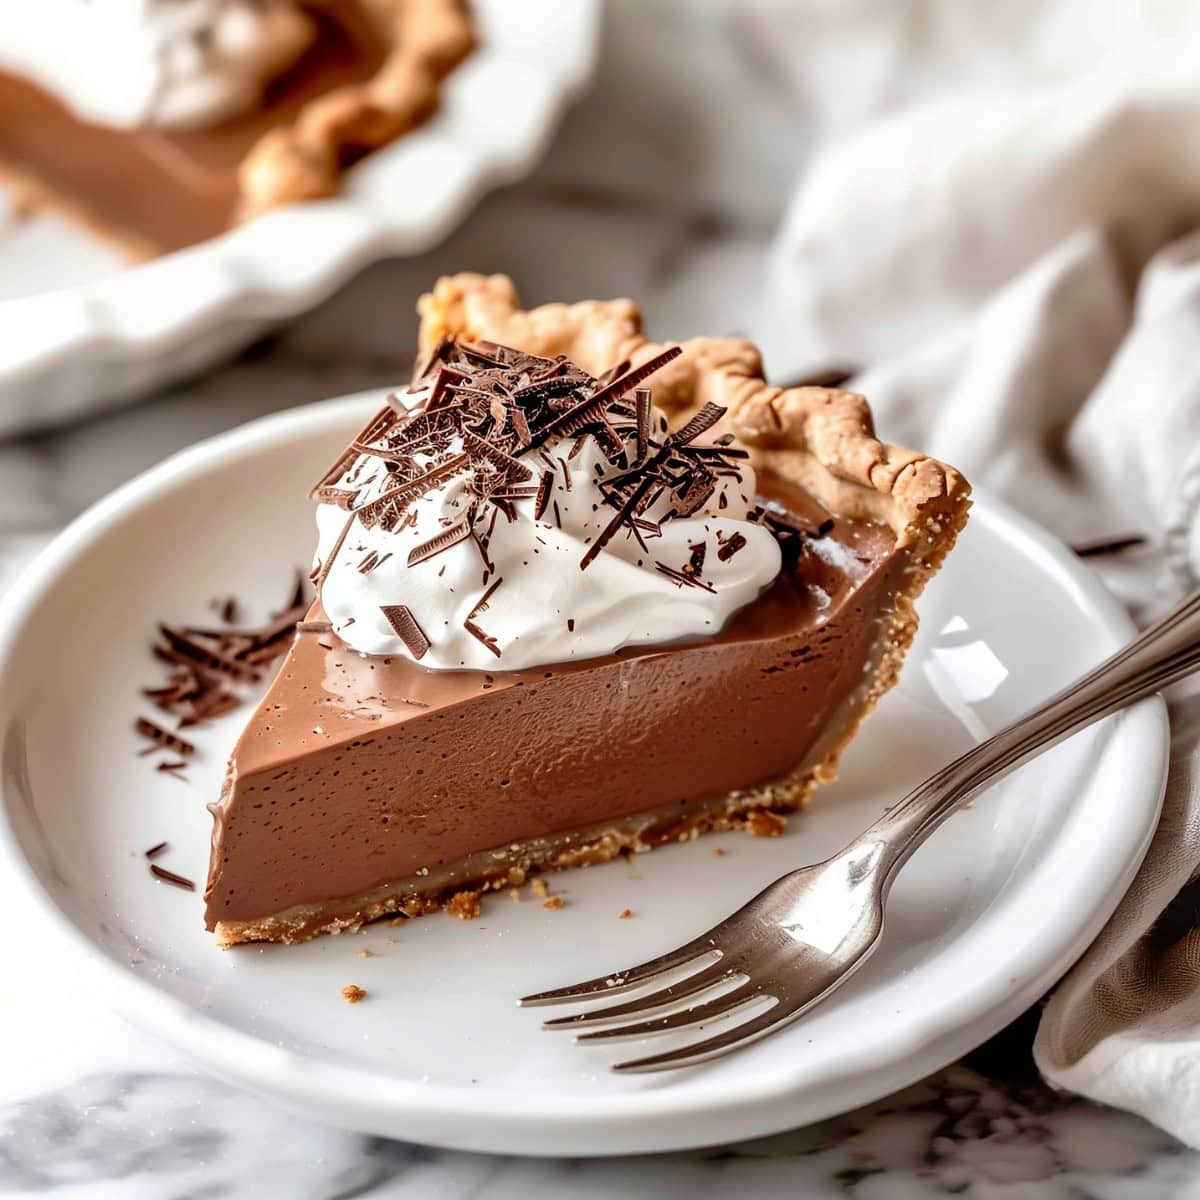 Gourmet French silk pie, made with premium chocolate and whipped topping